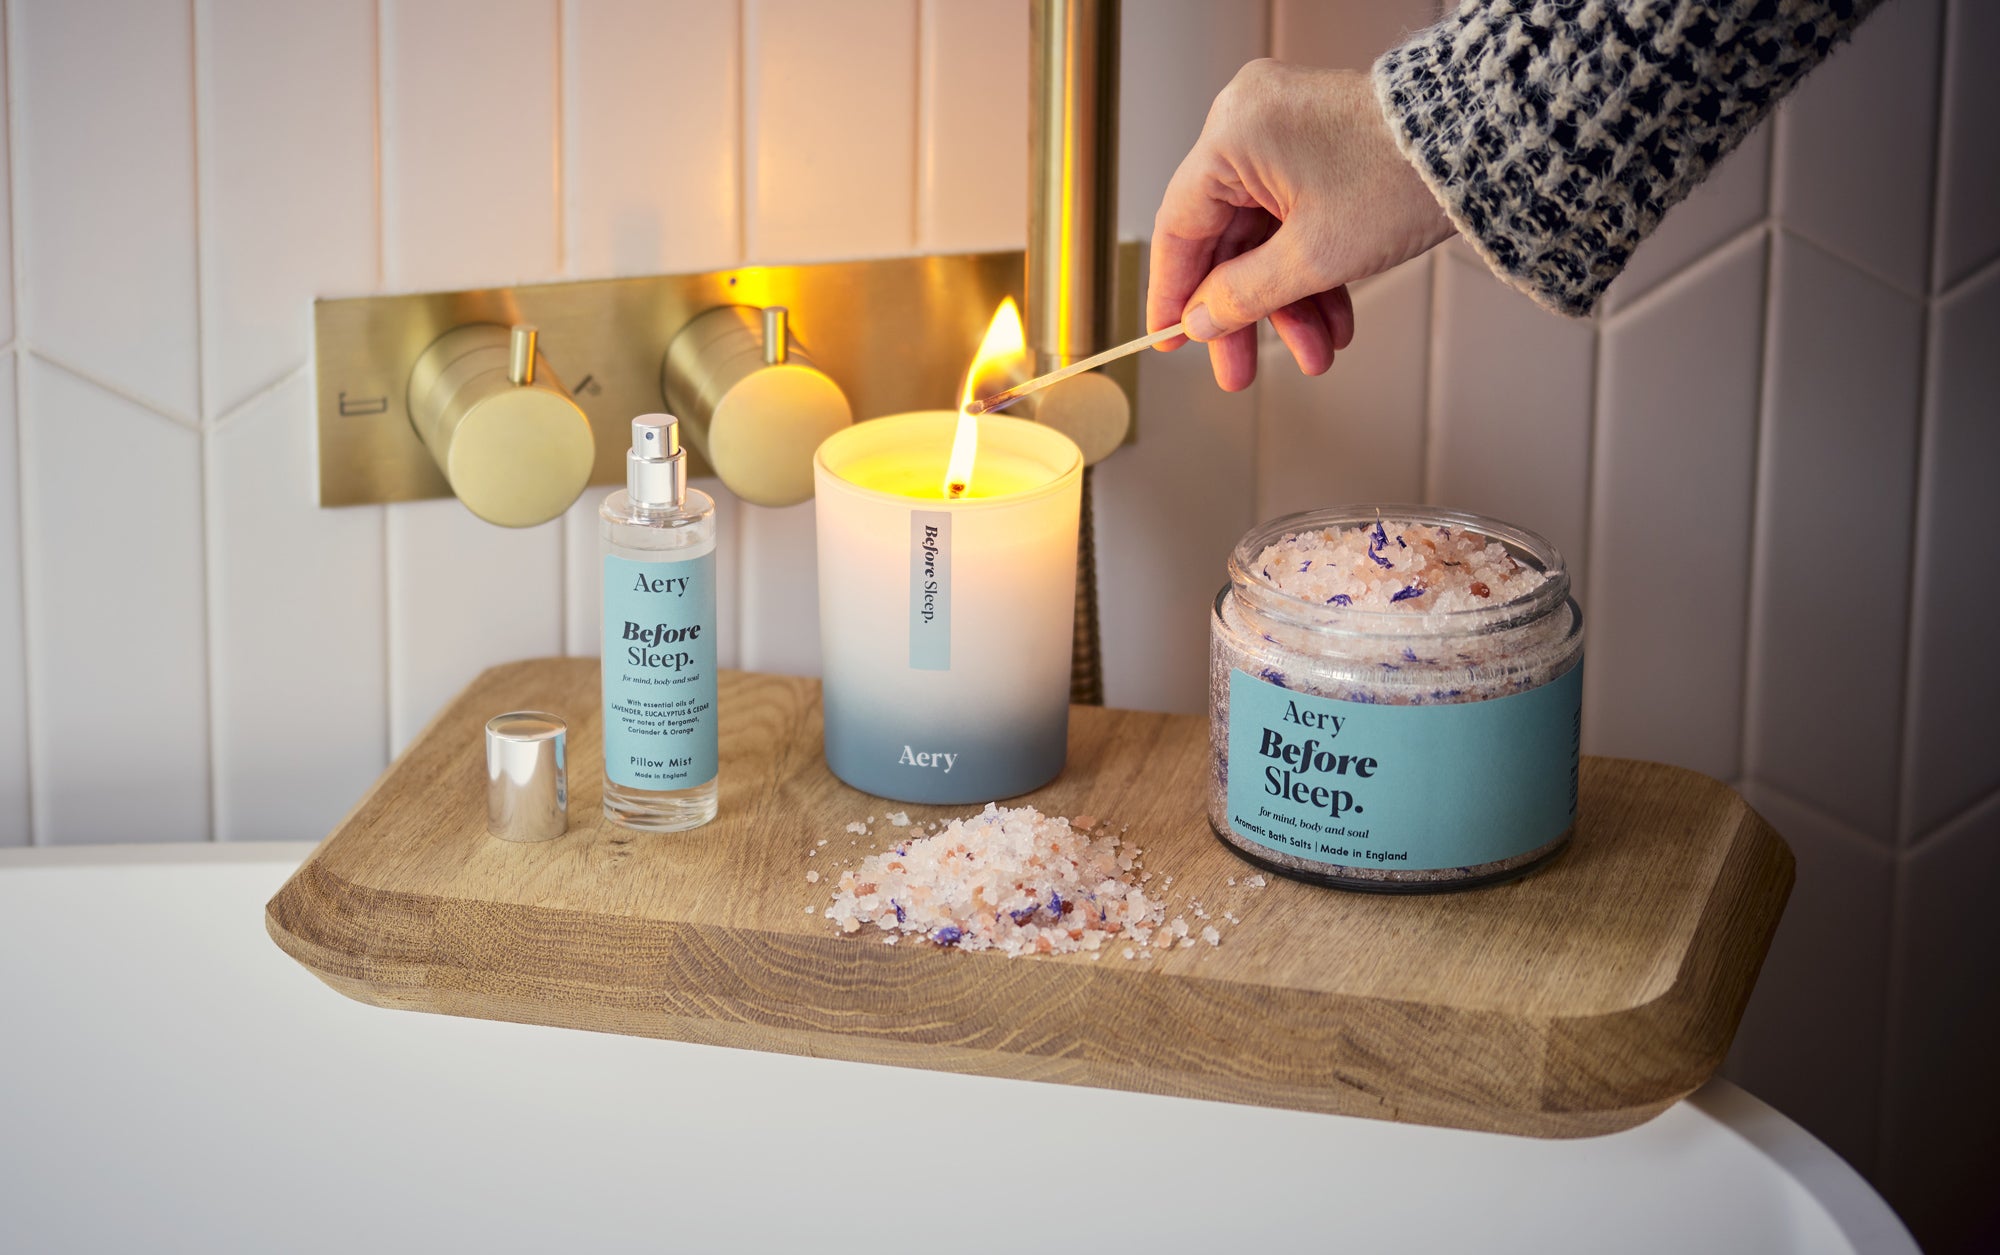 aery living bath salts candle and pillow mist with person lighting candle in a bathroom setting